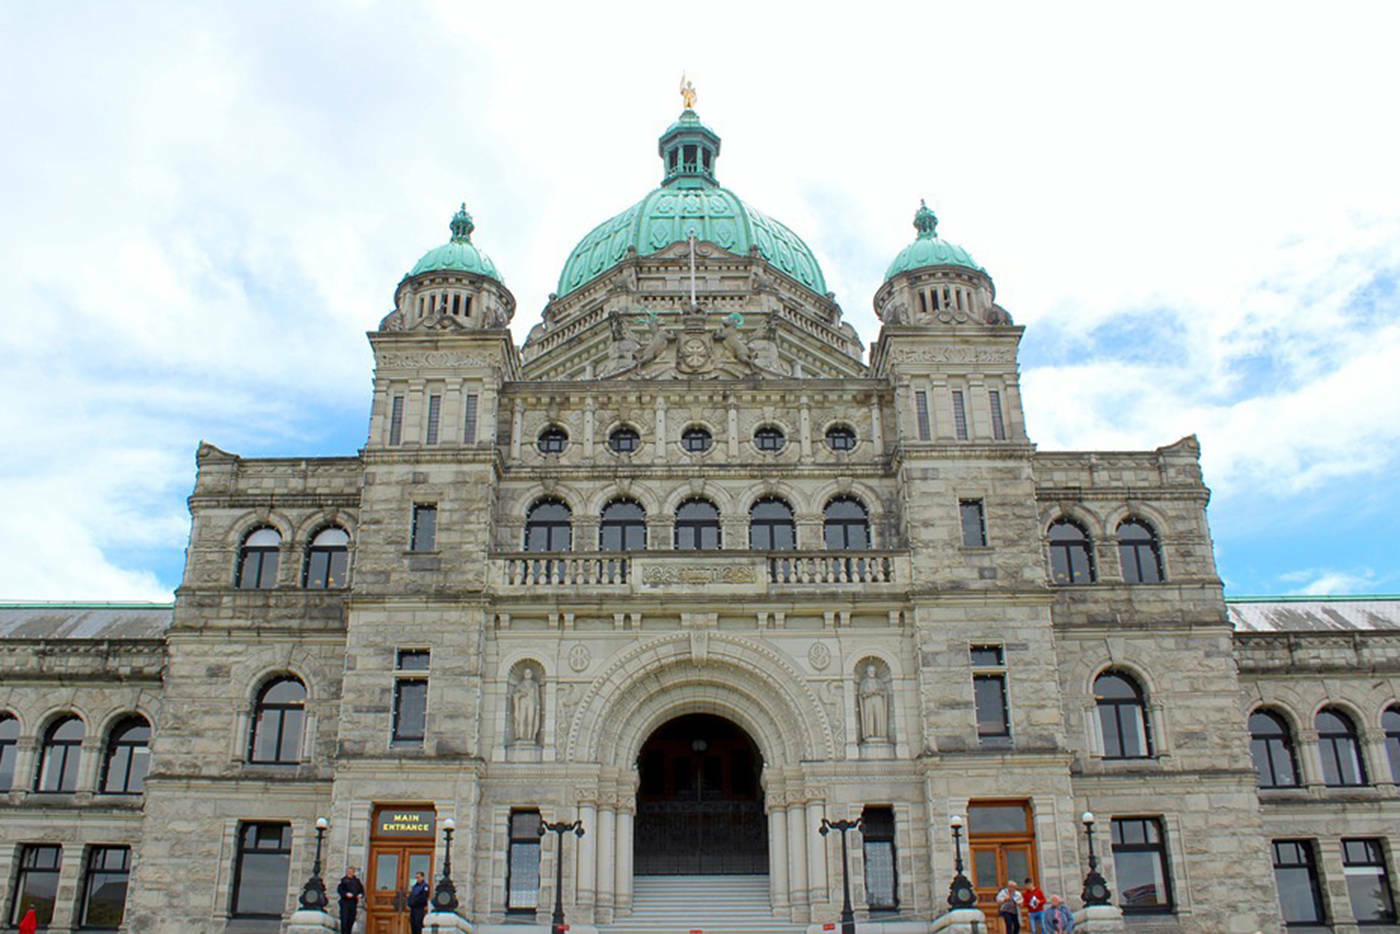 Victoria wants B.C. to remove councillors from making decisions on their own compensation. (Black Press Media file photo)